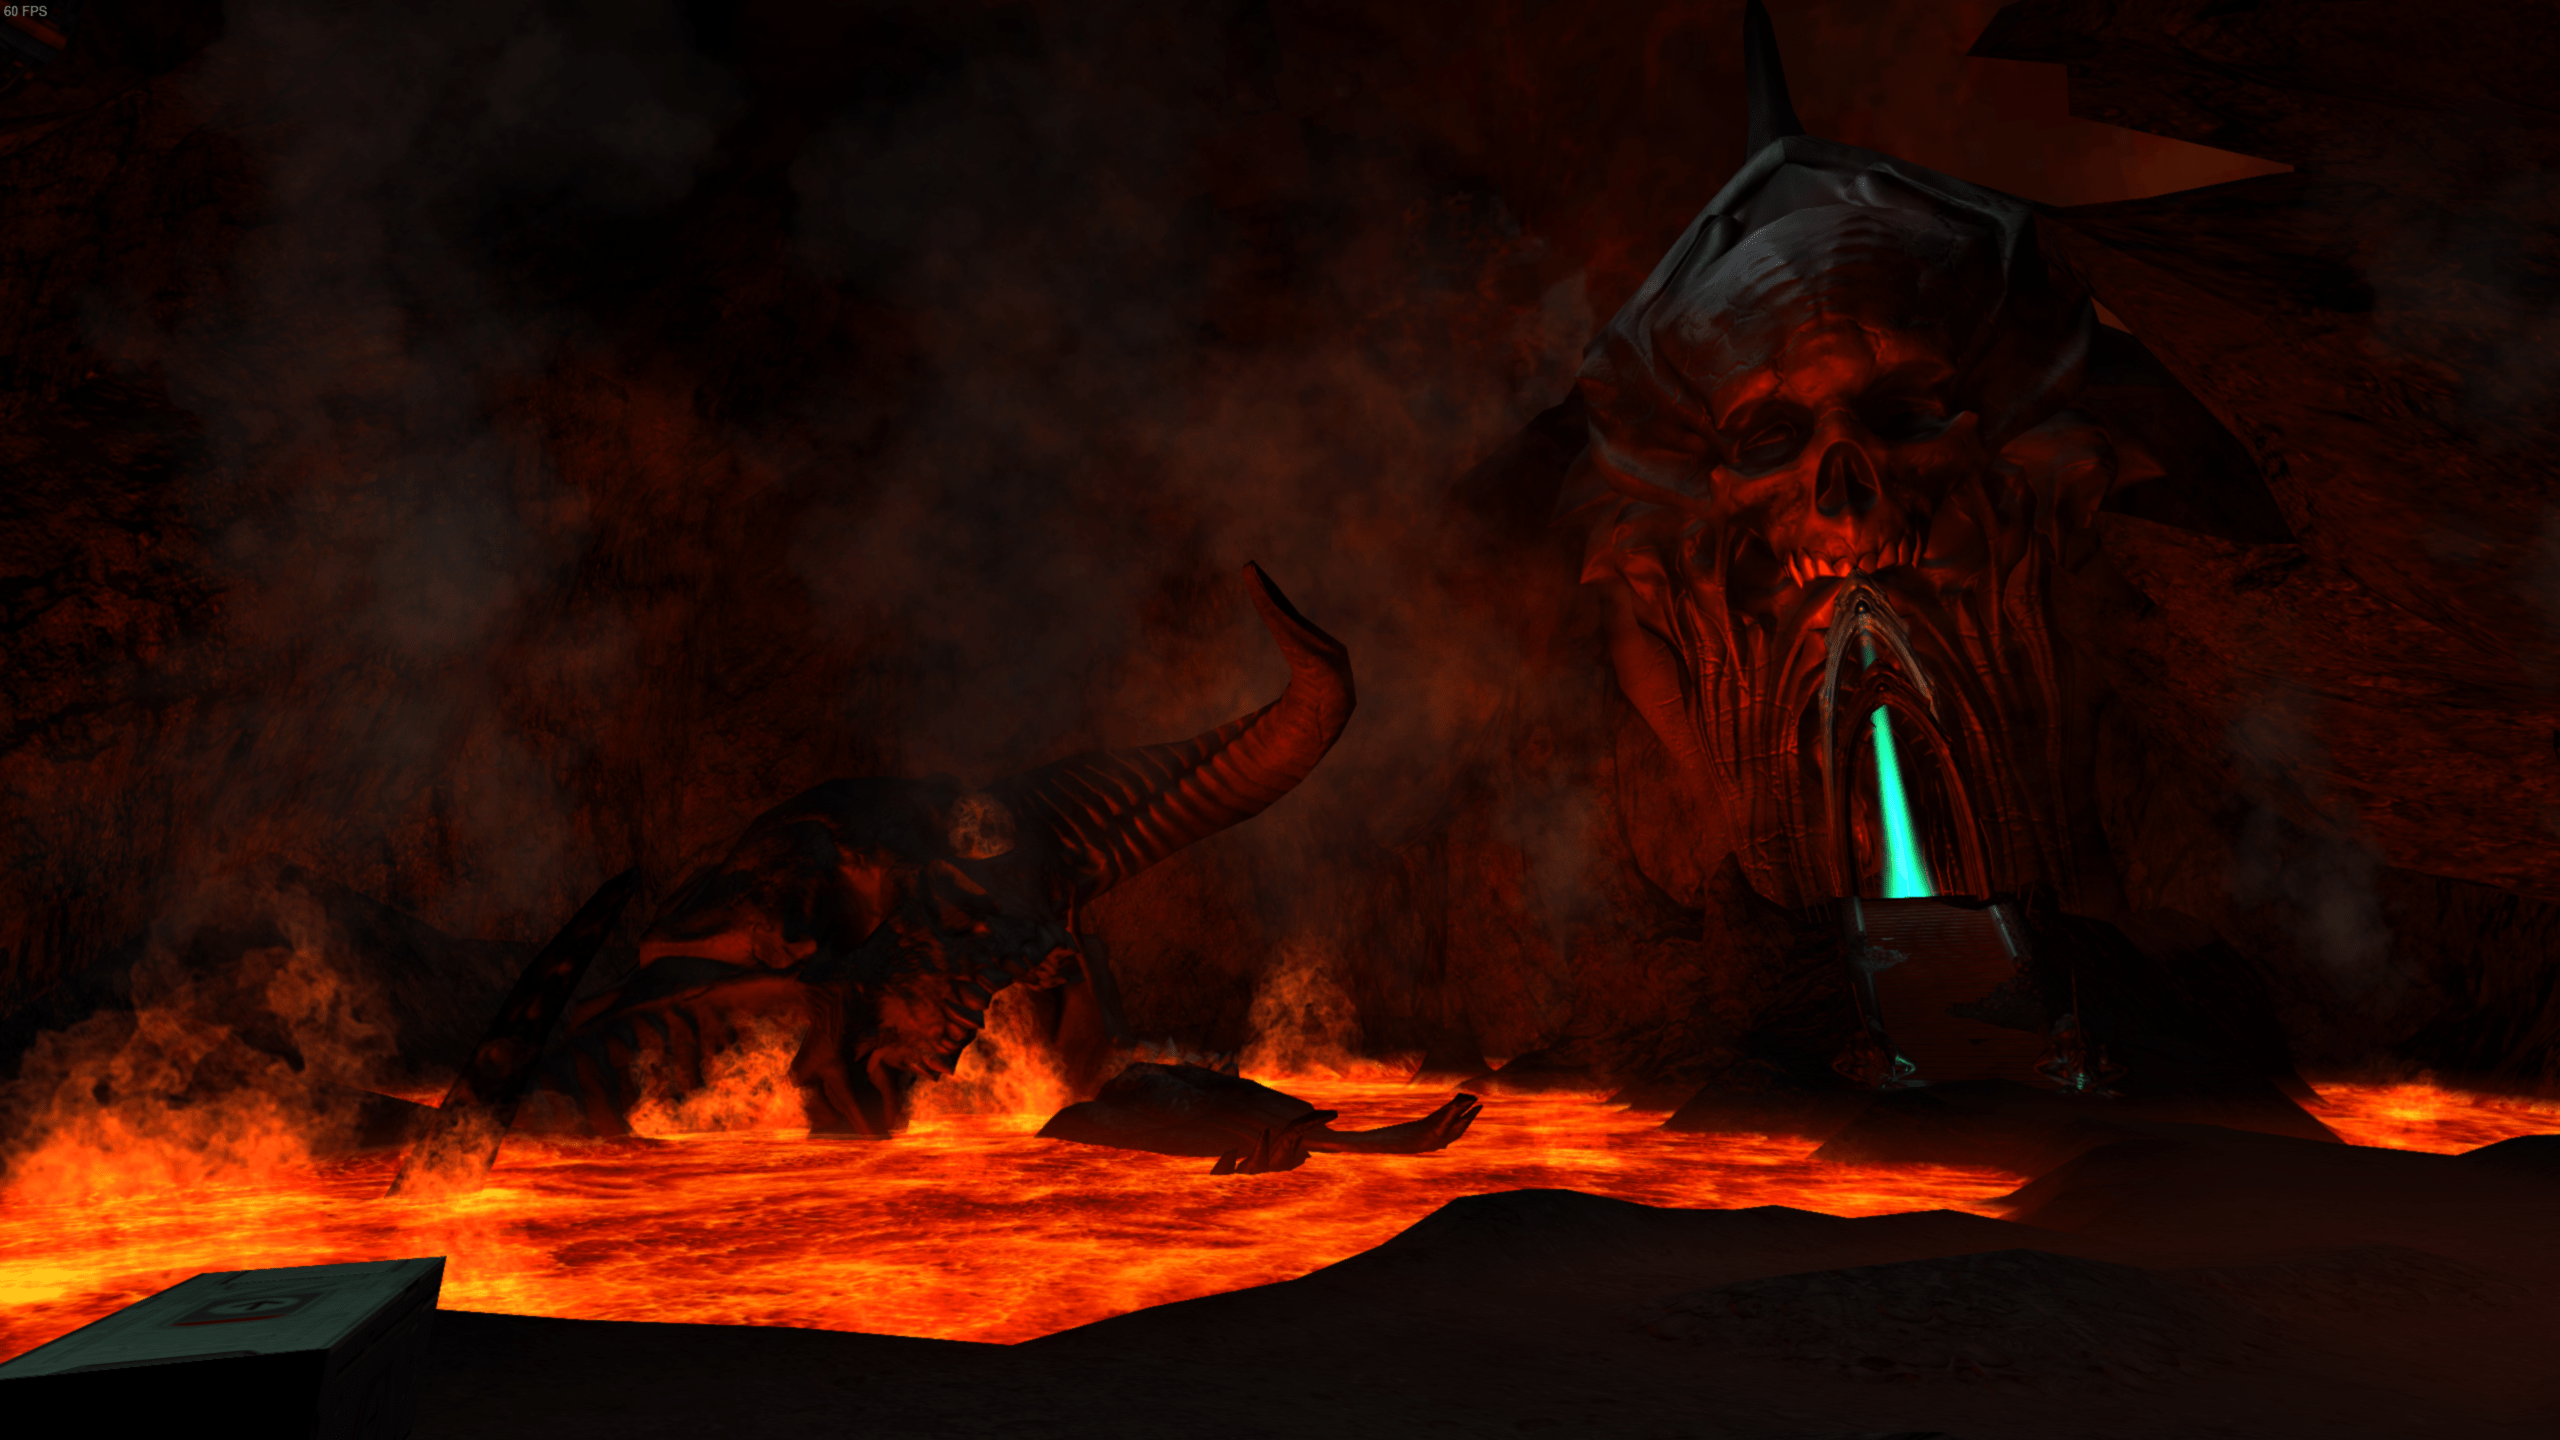 A dark cave with a large demon like creature in the background - Crimson